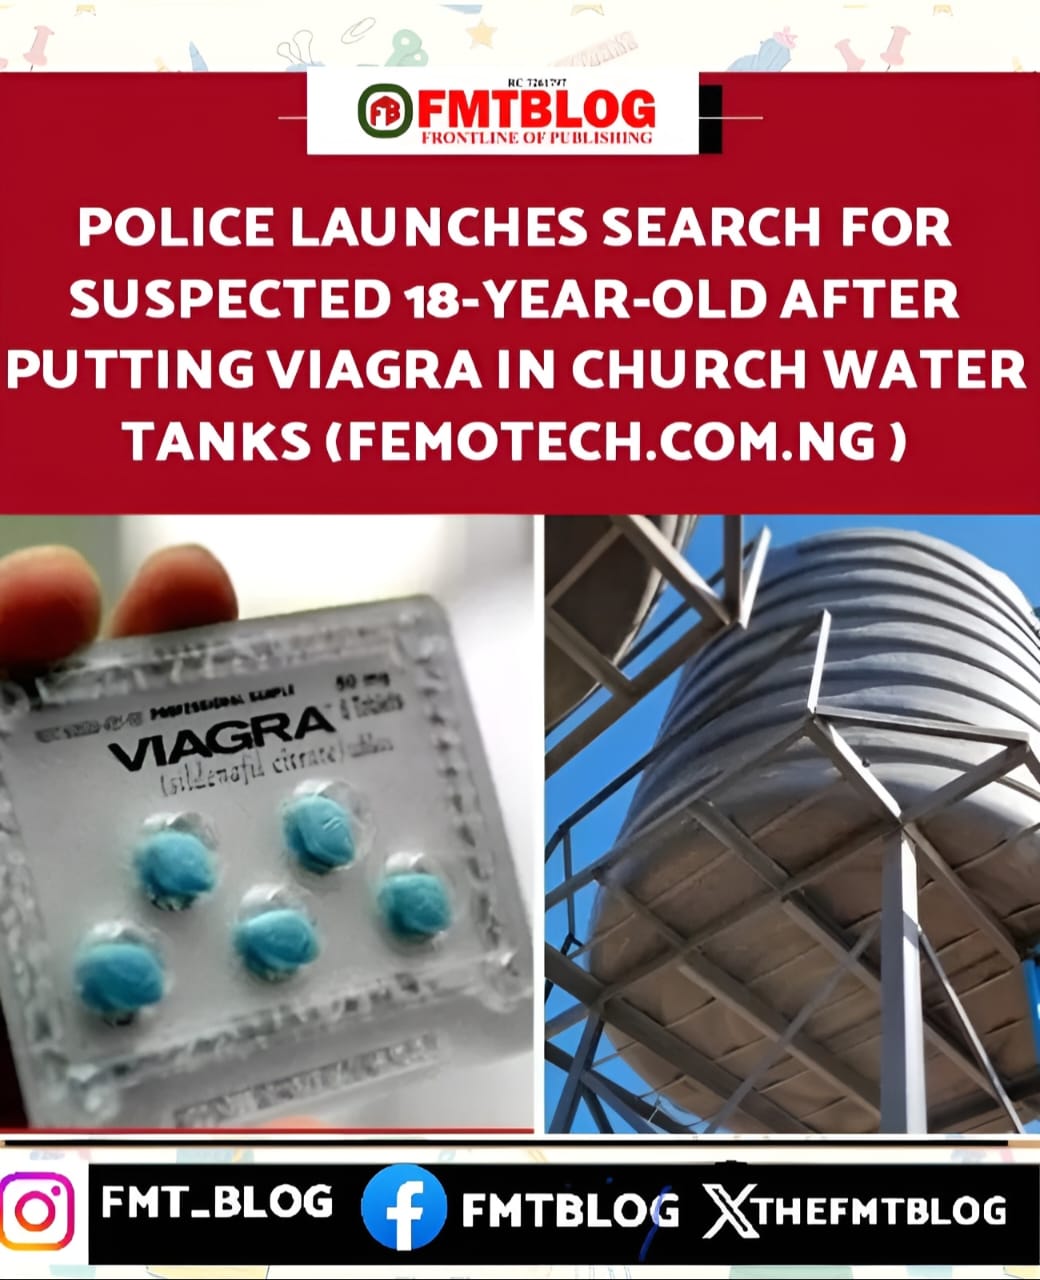 Police Launches Search For Suspected 18-Year-Old After Putting Viagra In Church Water Tanks